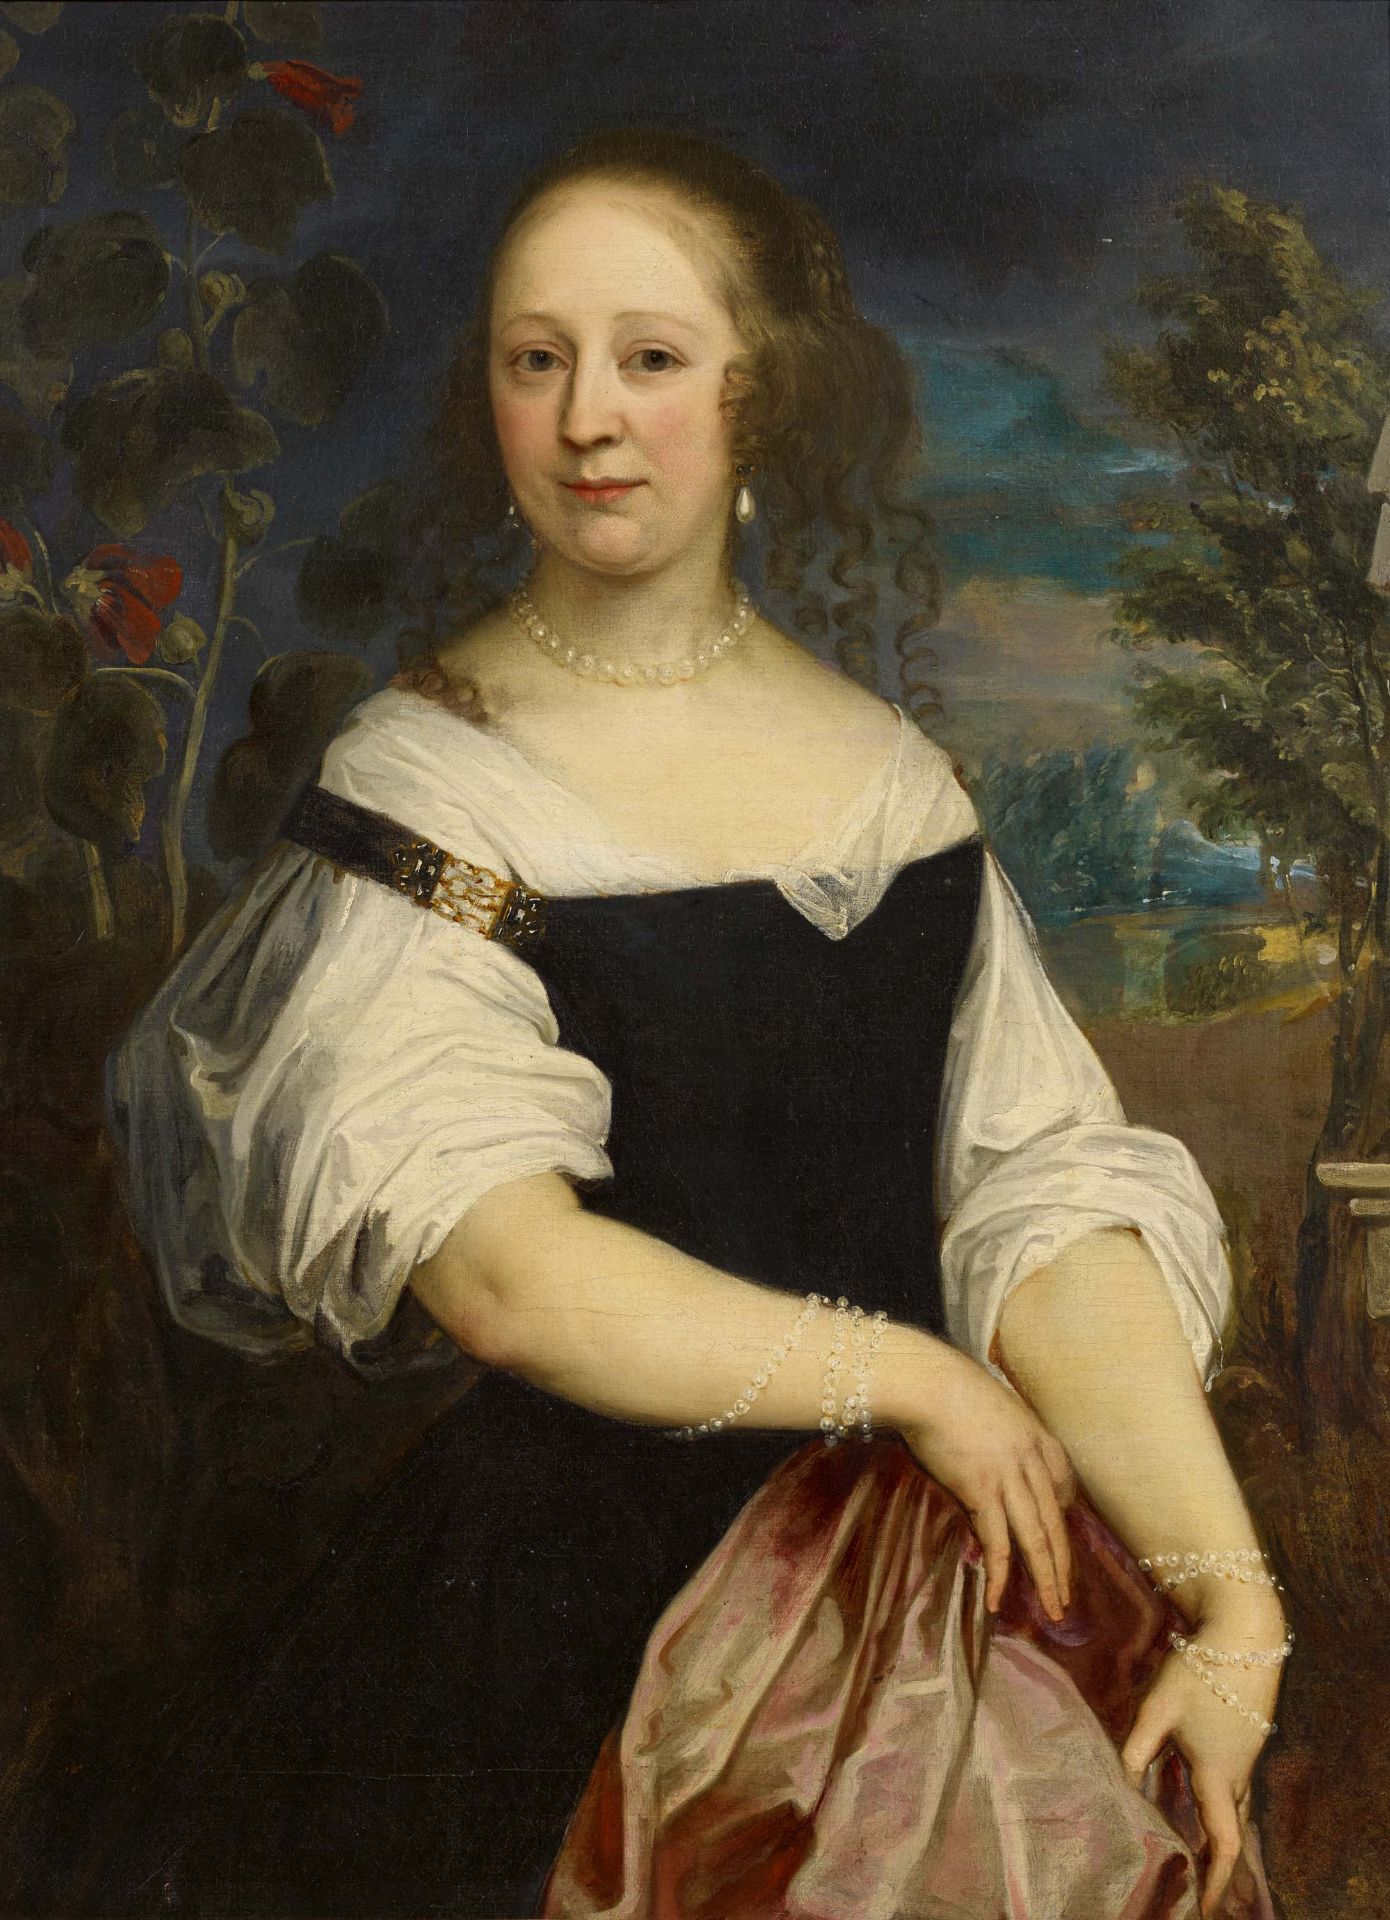 Dutch School: Portrait of a Lady with Pearl Jewellery in front of Landscape Background